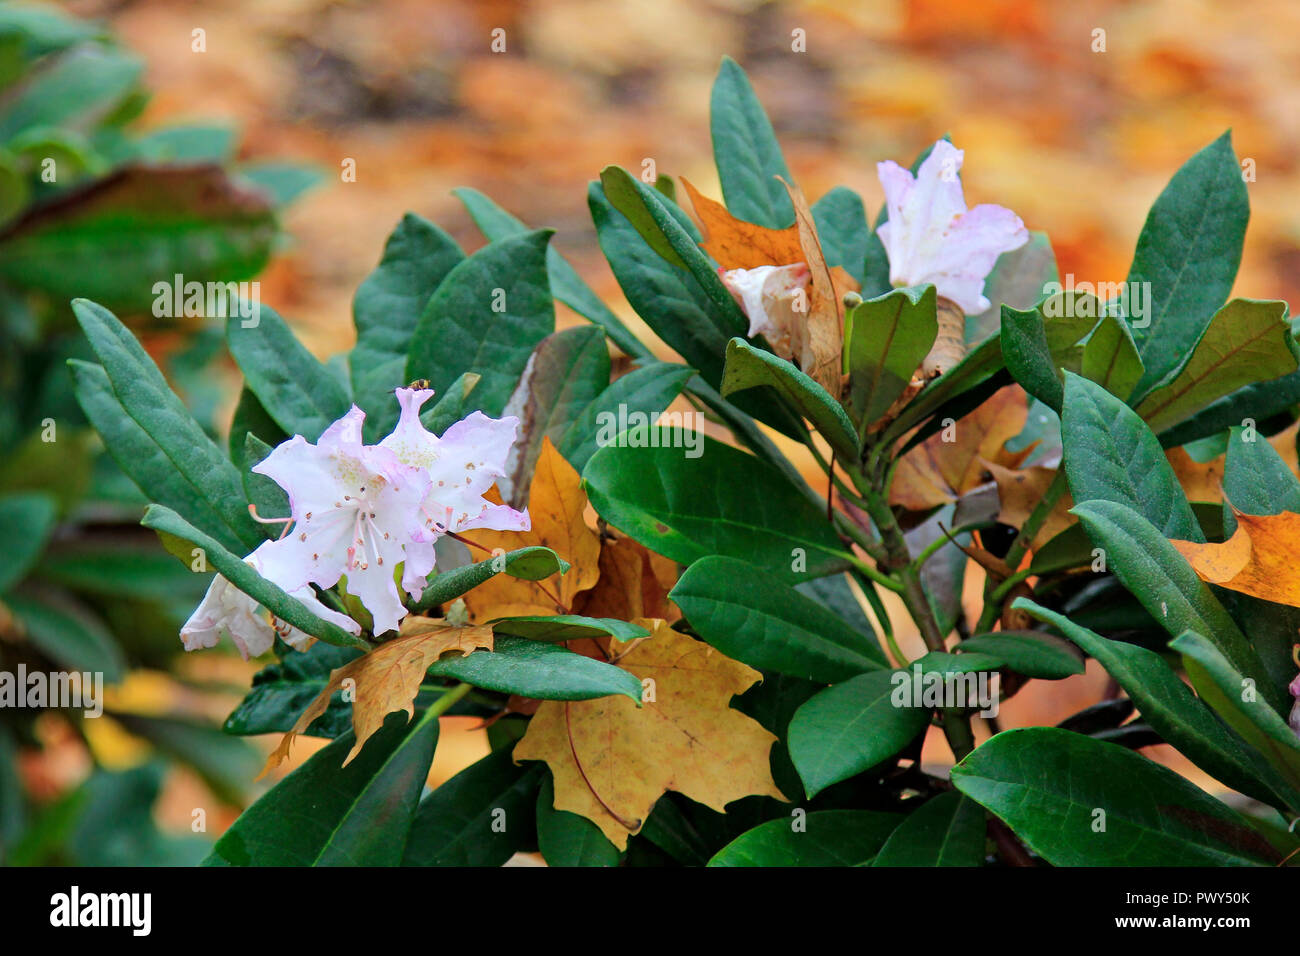 Helsinki, Finland - October 18, 2018. Rhododendron flowers and fallen yellow leaves. Some plants are fooled into flowering in a second spring due to unseasonably warm October in Helsinki, Finland. Credit: Taina Sohlman/ Alamy Live News Stock Photo